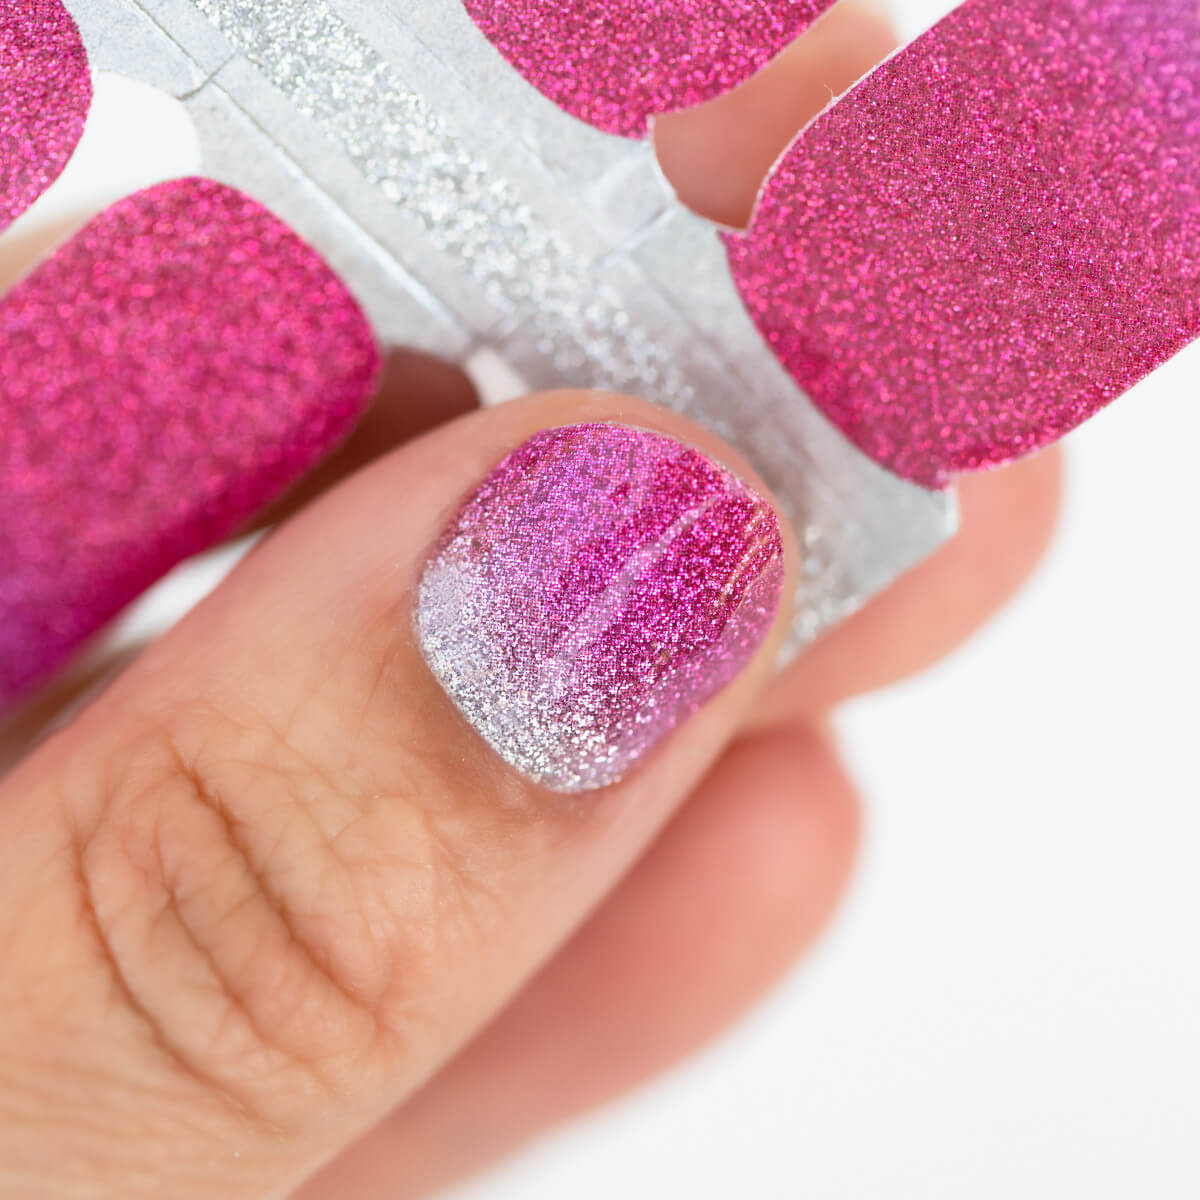 The Only 8 Tips You Need to Apply Nail Polish Without Streaks!